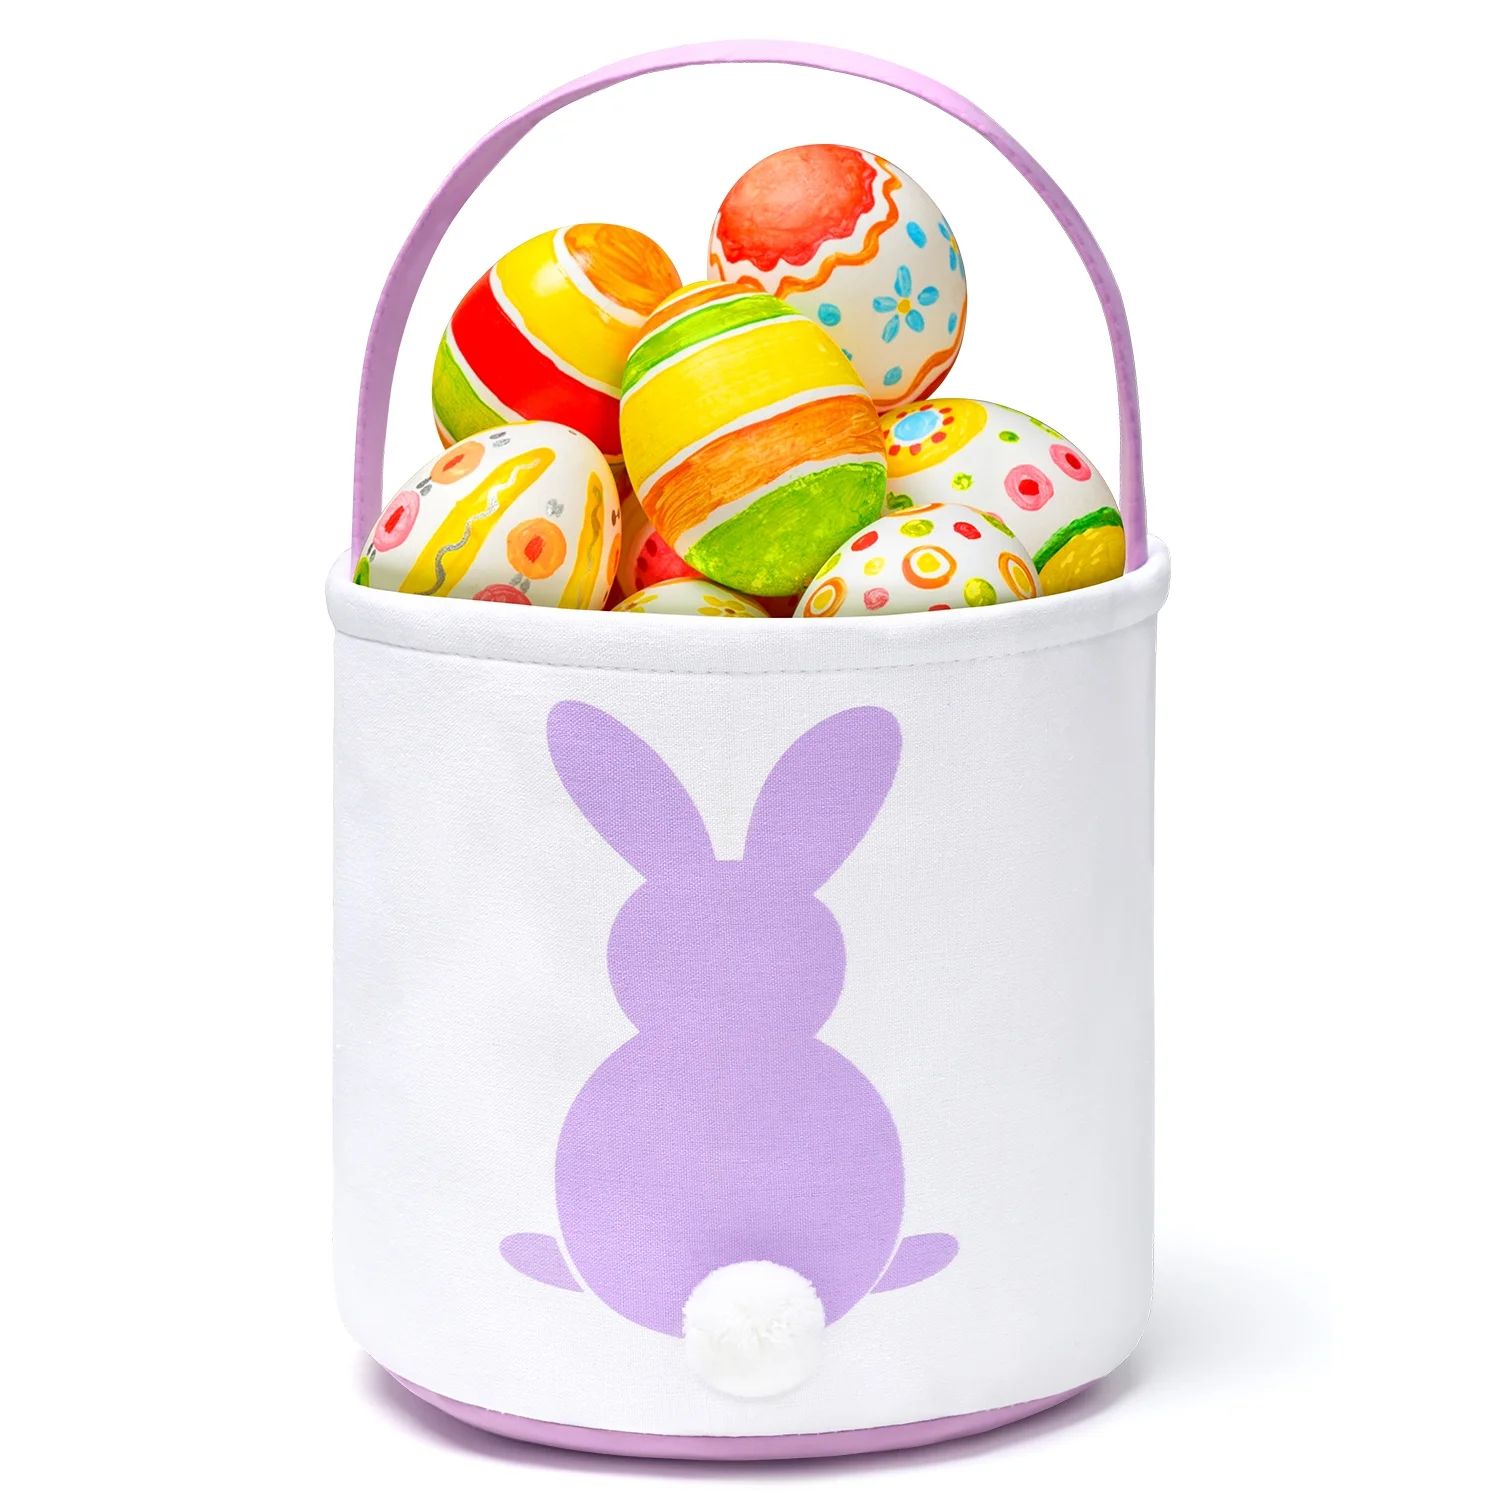 Ayieyill Easter Basket, Easter Bunny Baskets for Kids with Cute Rabbit Pattern, Easter gift baske... | Walmart (US)